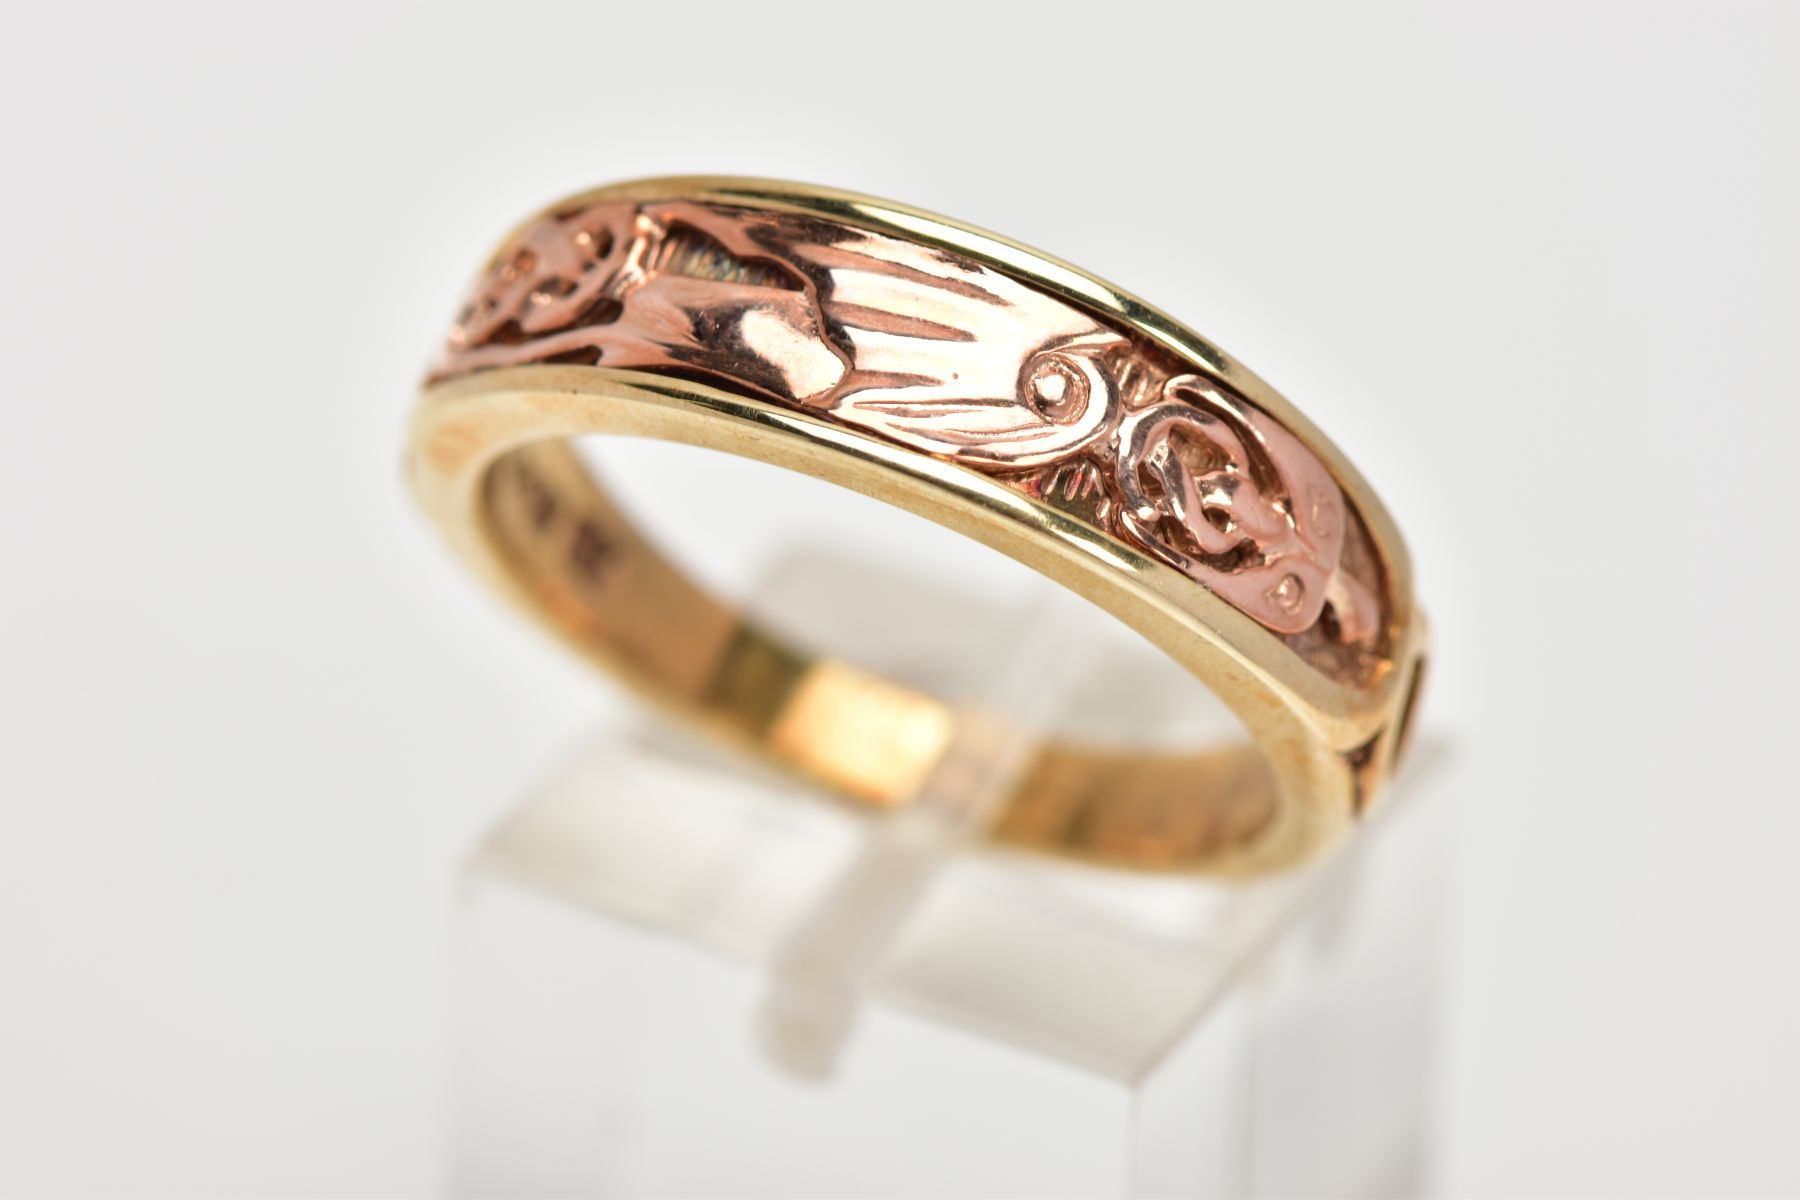 A 9CT GOLD BI-COLOUR CLOGAU RING, the rose gold 'Dragon's Wing' design applied to the tapered yellow